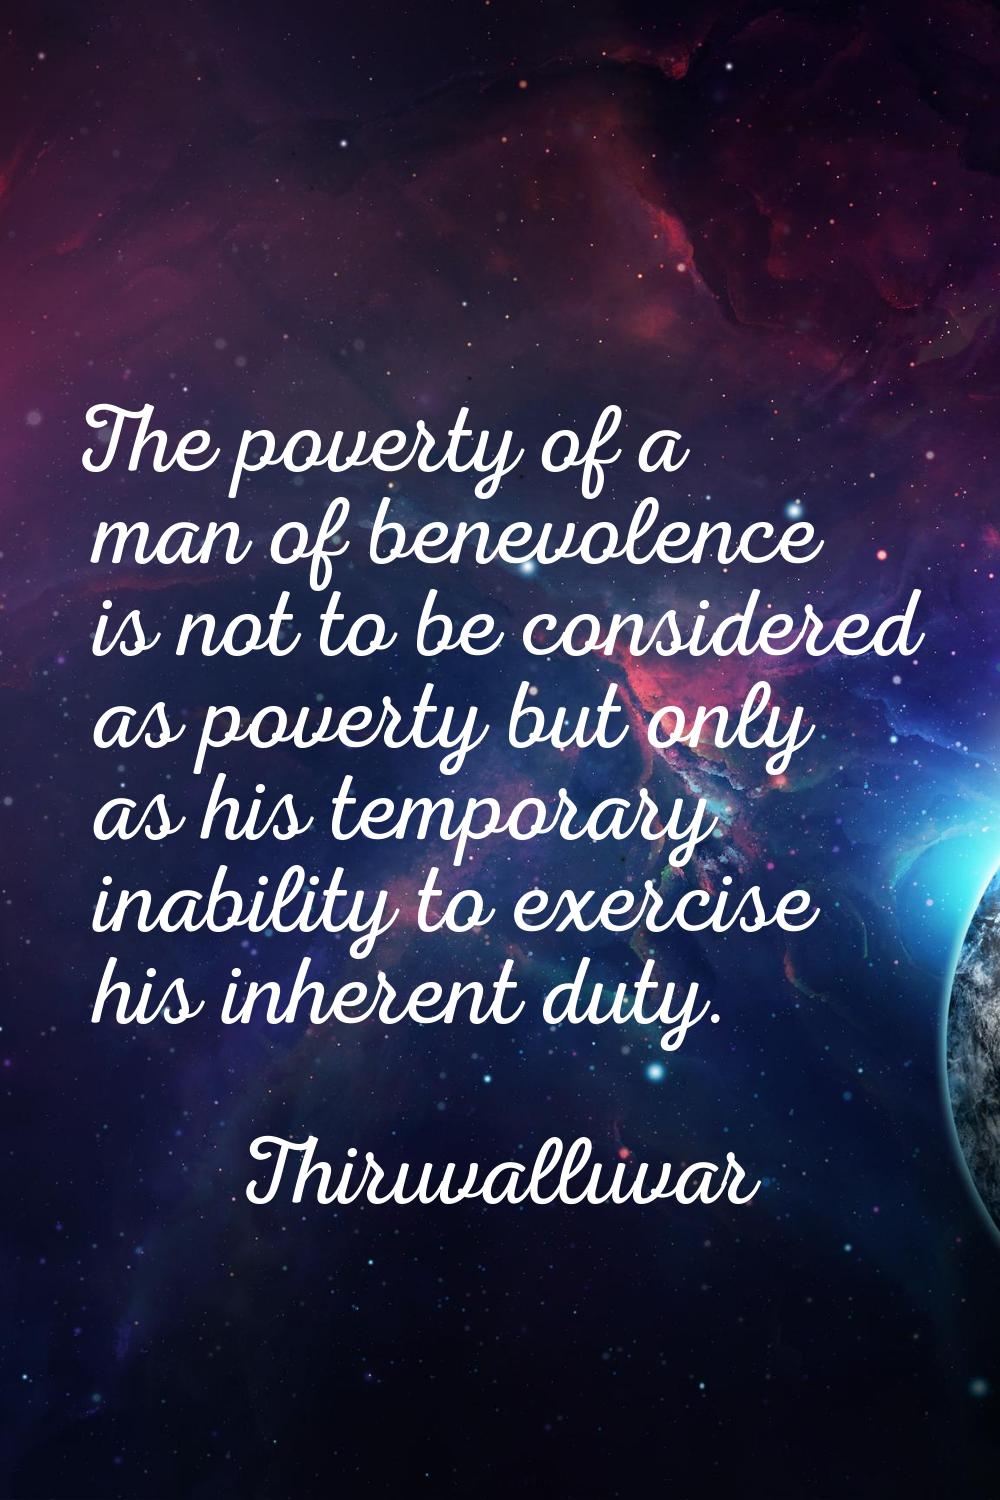 The poverty of a man of benevolence is not to be considered as poverty but only as his temporary in